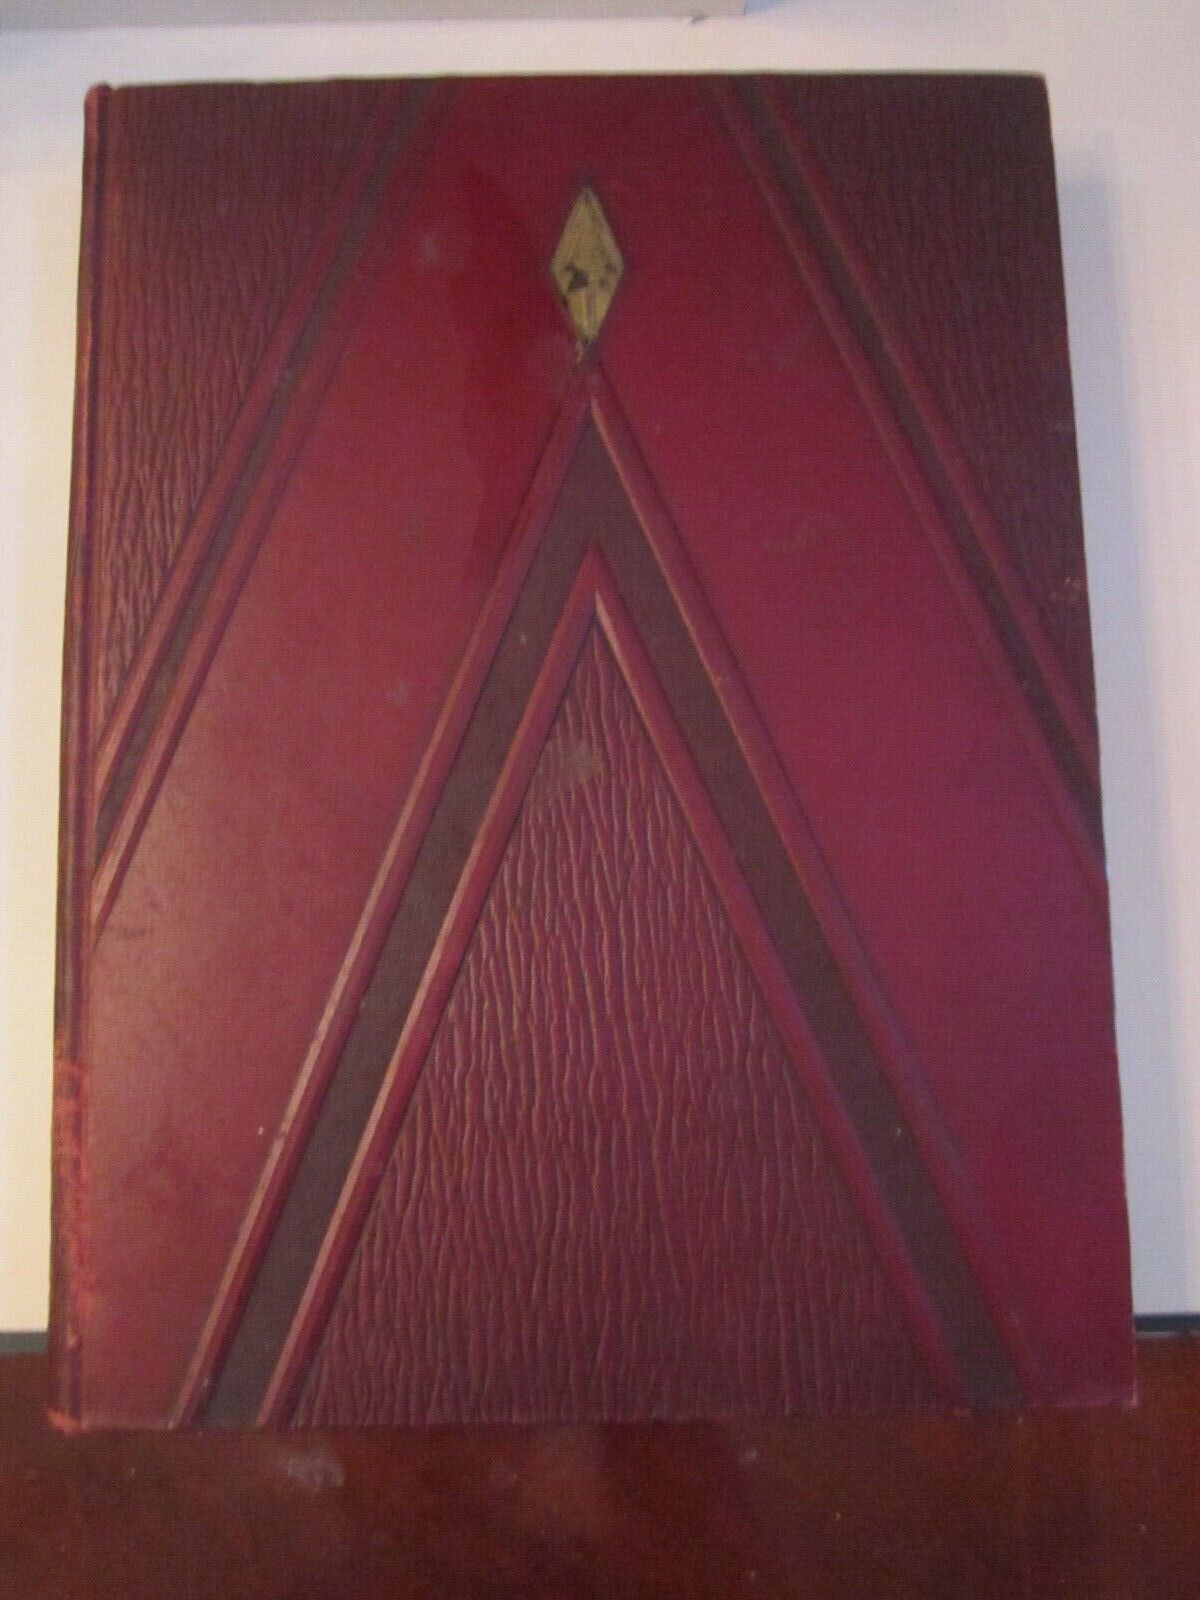 1933 STANFORD UNIVERSITY YEARBOOK - THE STANFORD QUAD - LEATHER BOUND - HEAVY